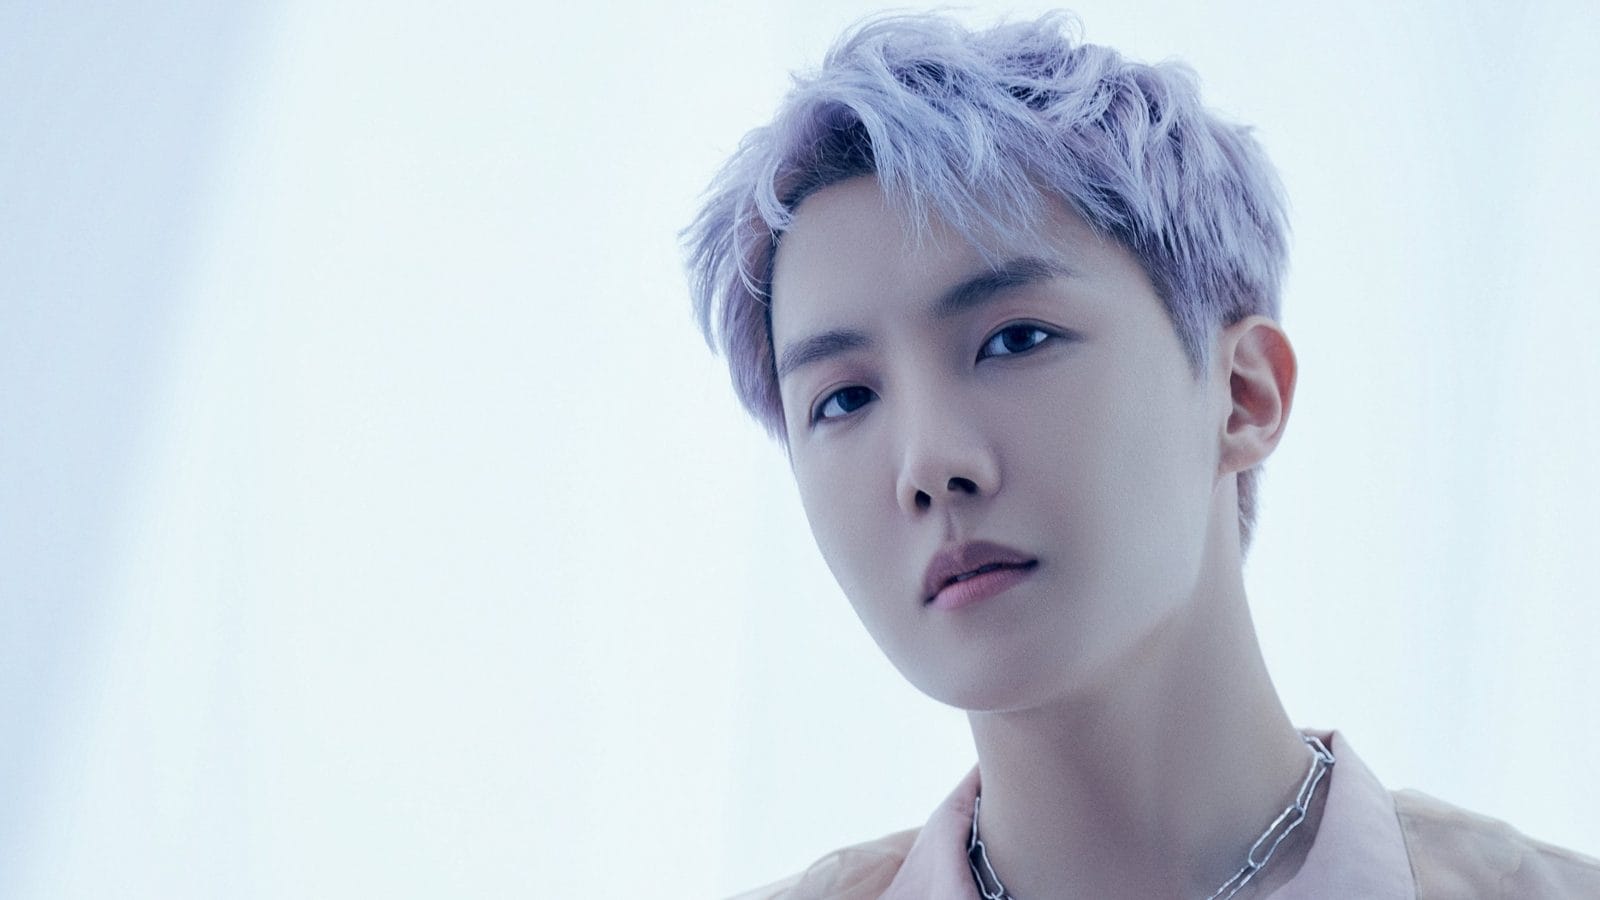 Going Solo BTS JHope Opens Up On Debut Studio Album Track Listings